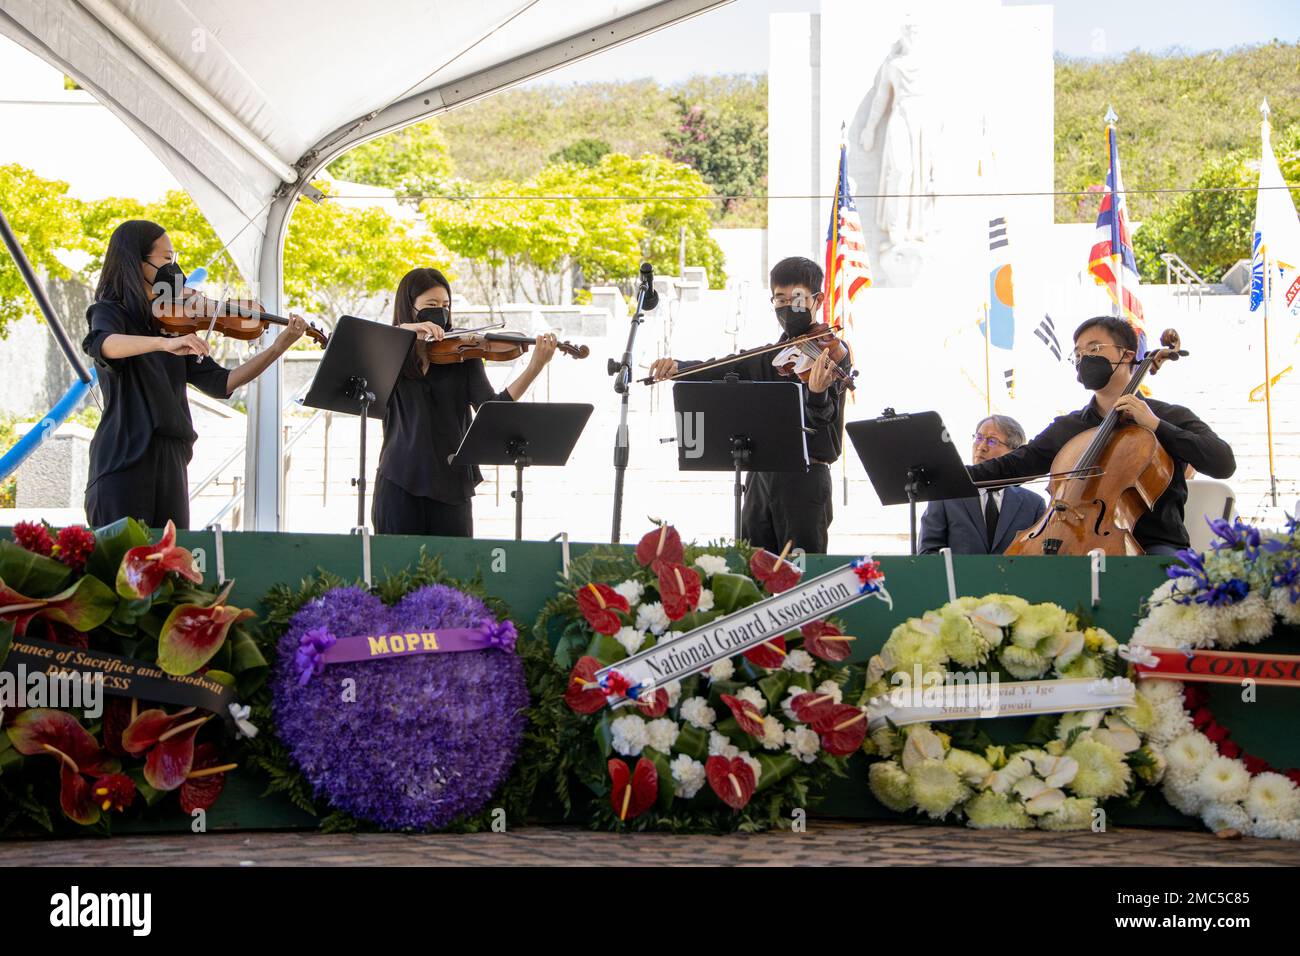 A string quartet from Hawaii Symphony Orchestra perform a special musical session during the 72nd Korean War Anniversary at the National Memorial Cemetery of the Pacific (Punchbowl) in Honolulu, Hawaii, June 25, 2022. The Korean War began on June 25, 1950, when North Korean armed forces invaded South Korea. The attack took place at several strategic points along the 38th parallel, the line dividing the communist Democratic People’s Republic of Korea from the Republic of Korea in the south. This event honors the lives lost and the sacrifices made during the war. Stock Photo